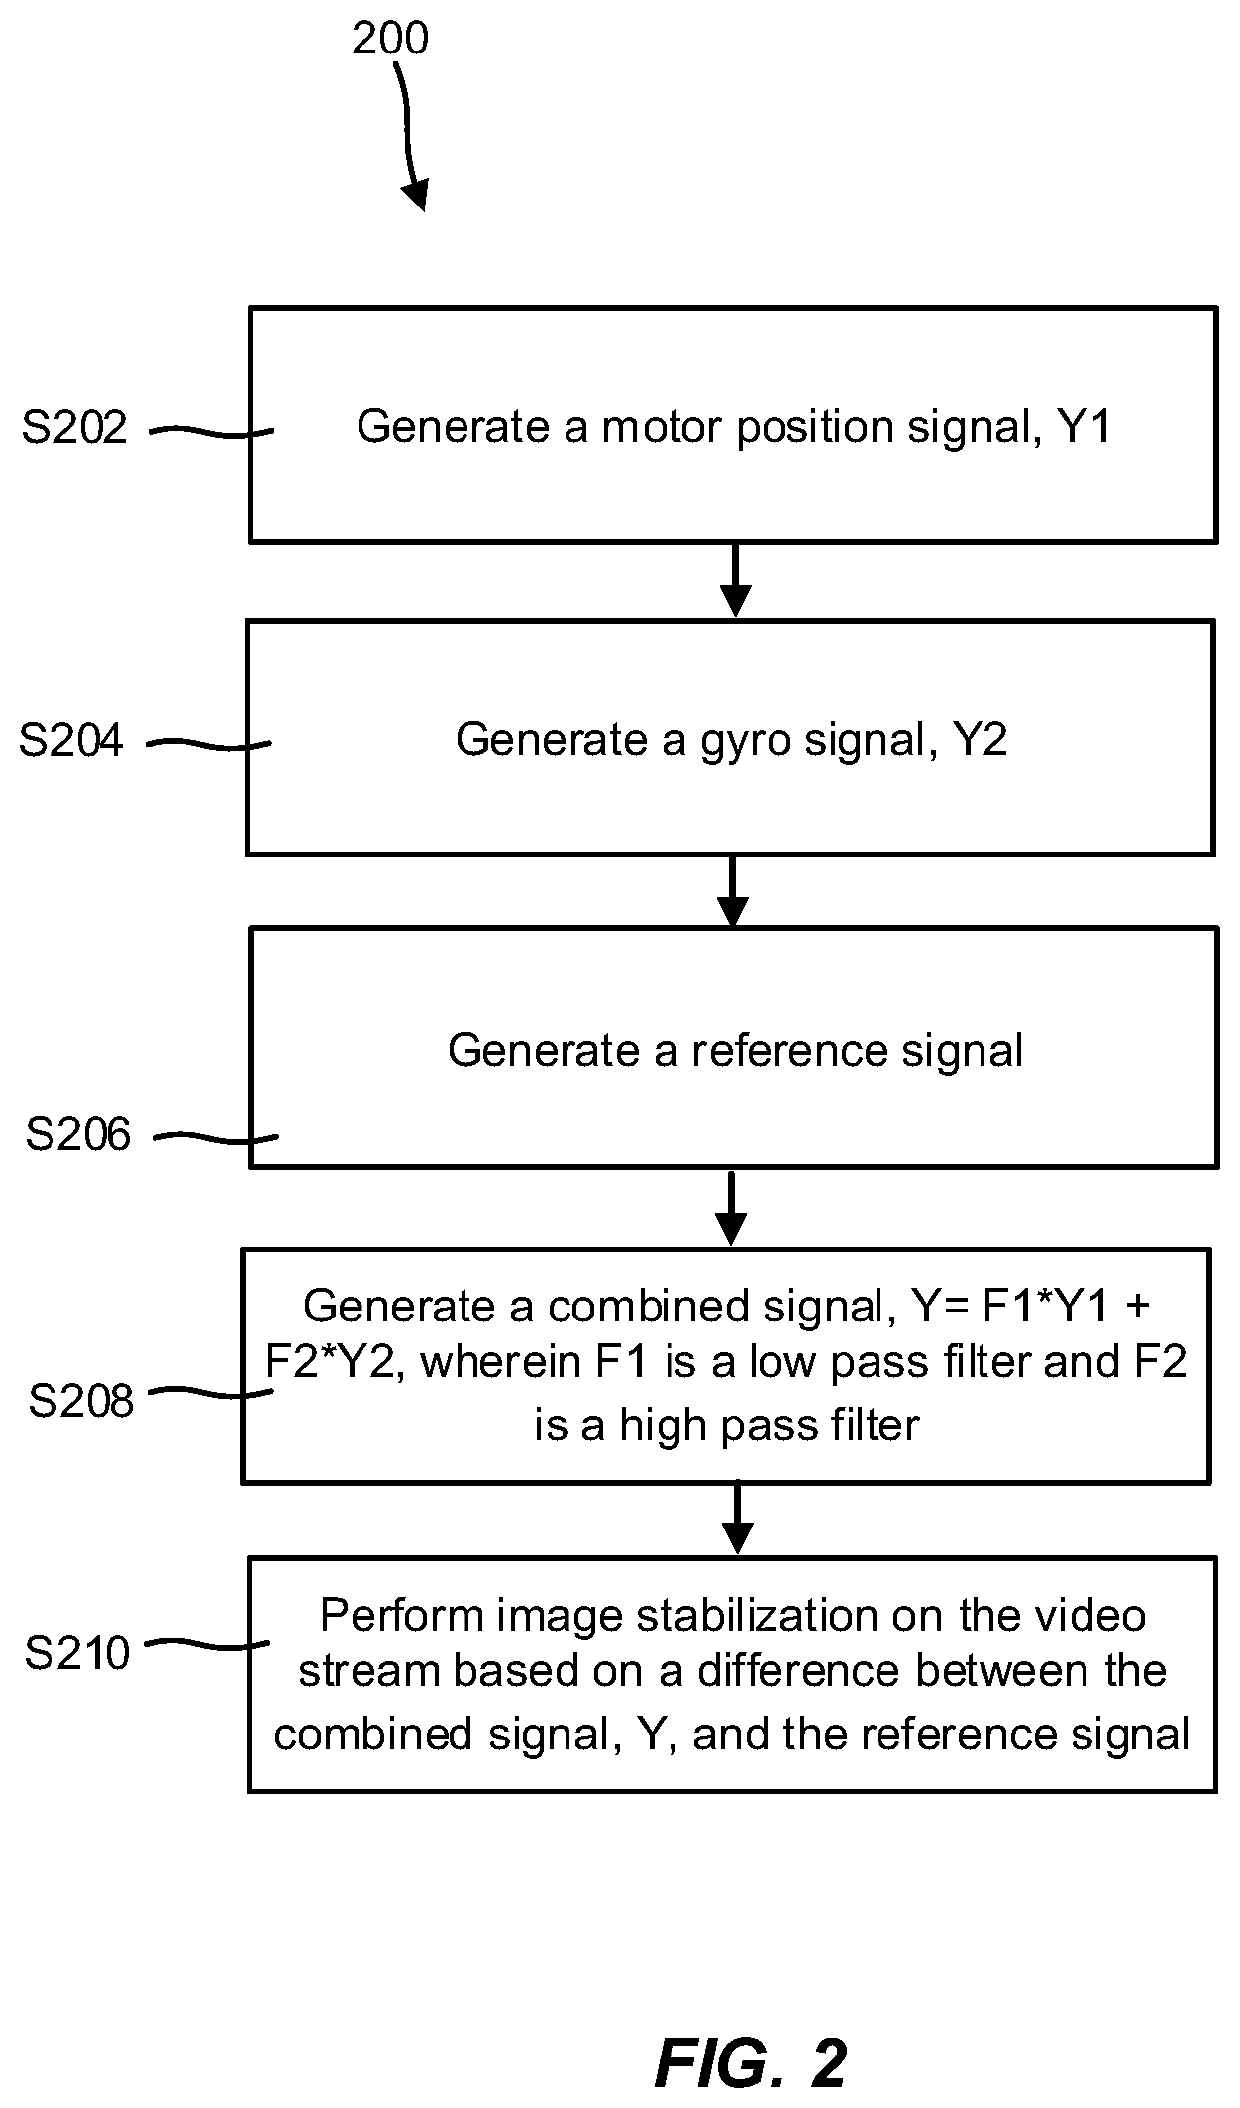 Image stabilization of a video stream captured by a panable and/or tiltable video camera